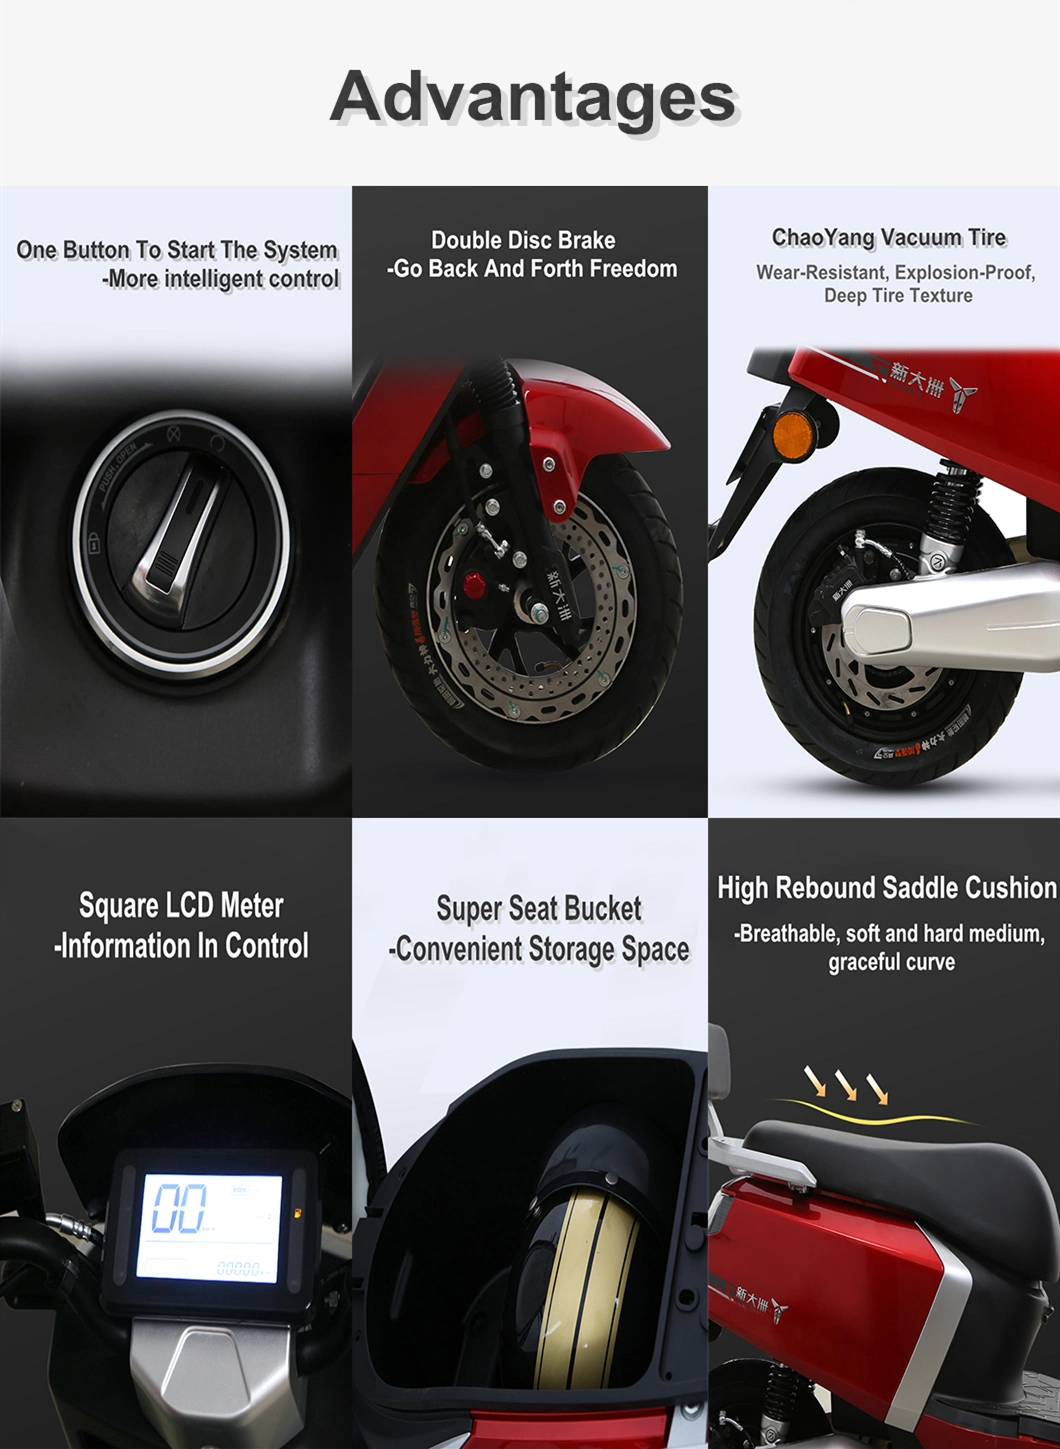 Best Quality Electric Motorcycle 500W 20ah Motorcycle Eletricas for Sale